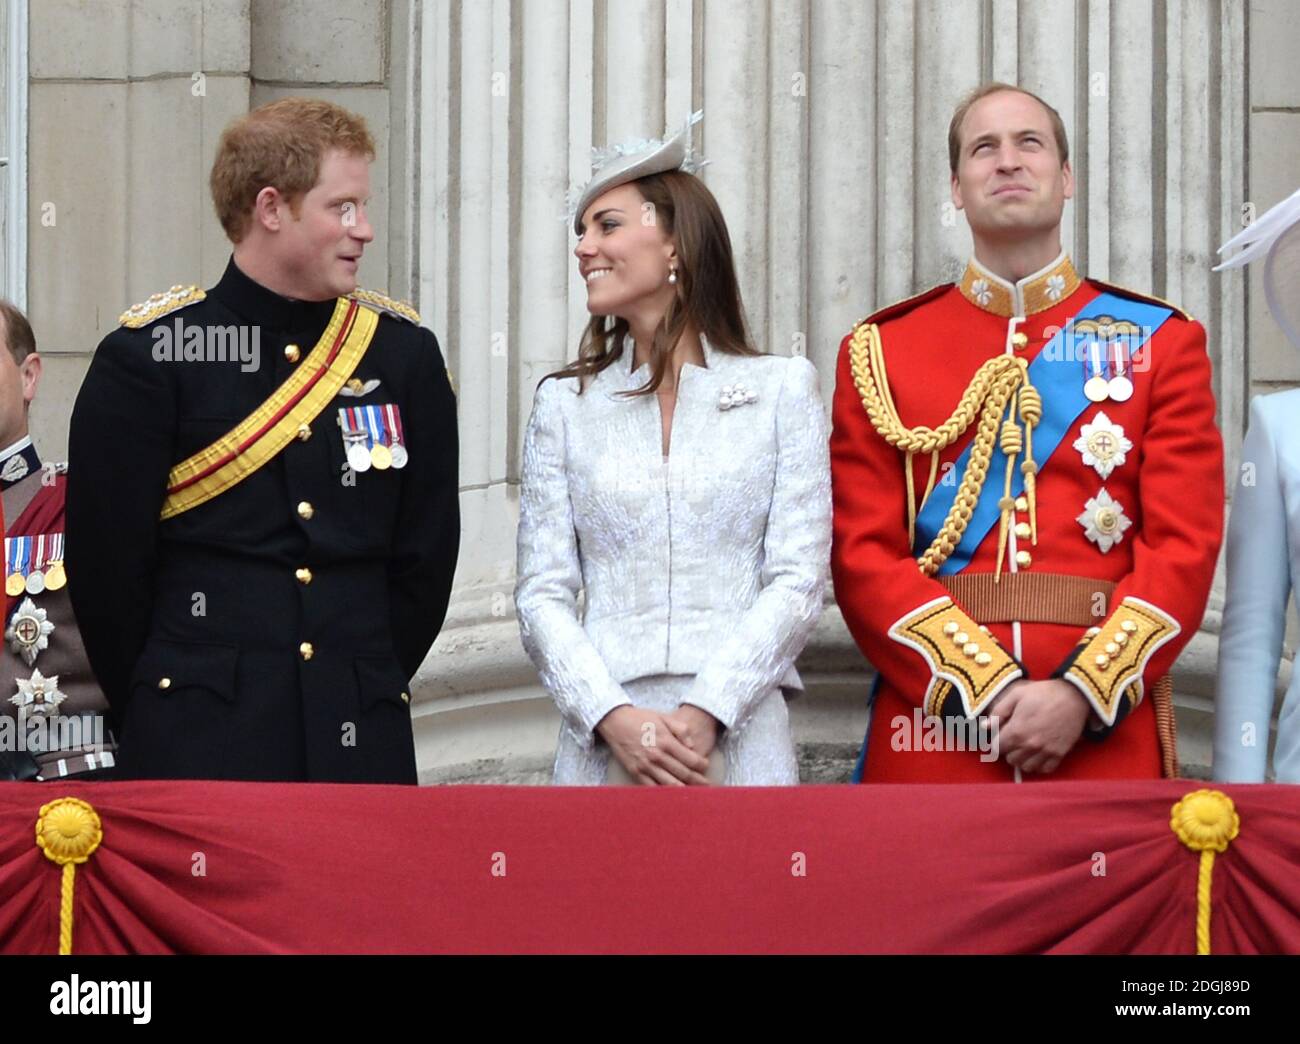 HM The Queen, he Duke of Edinburgh, Prince Harry, Prince William, The Duke of Cambridge, The Duchess of Cambridge, Prince Charles and The Duchess of Cornwall attending Trooping the Colour in London. Stock Photo